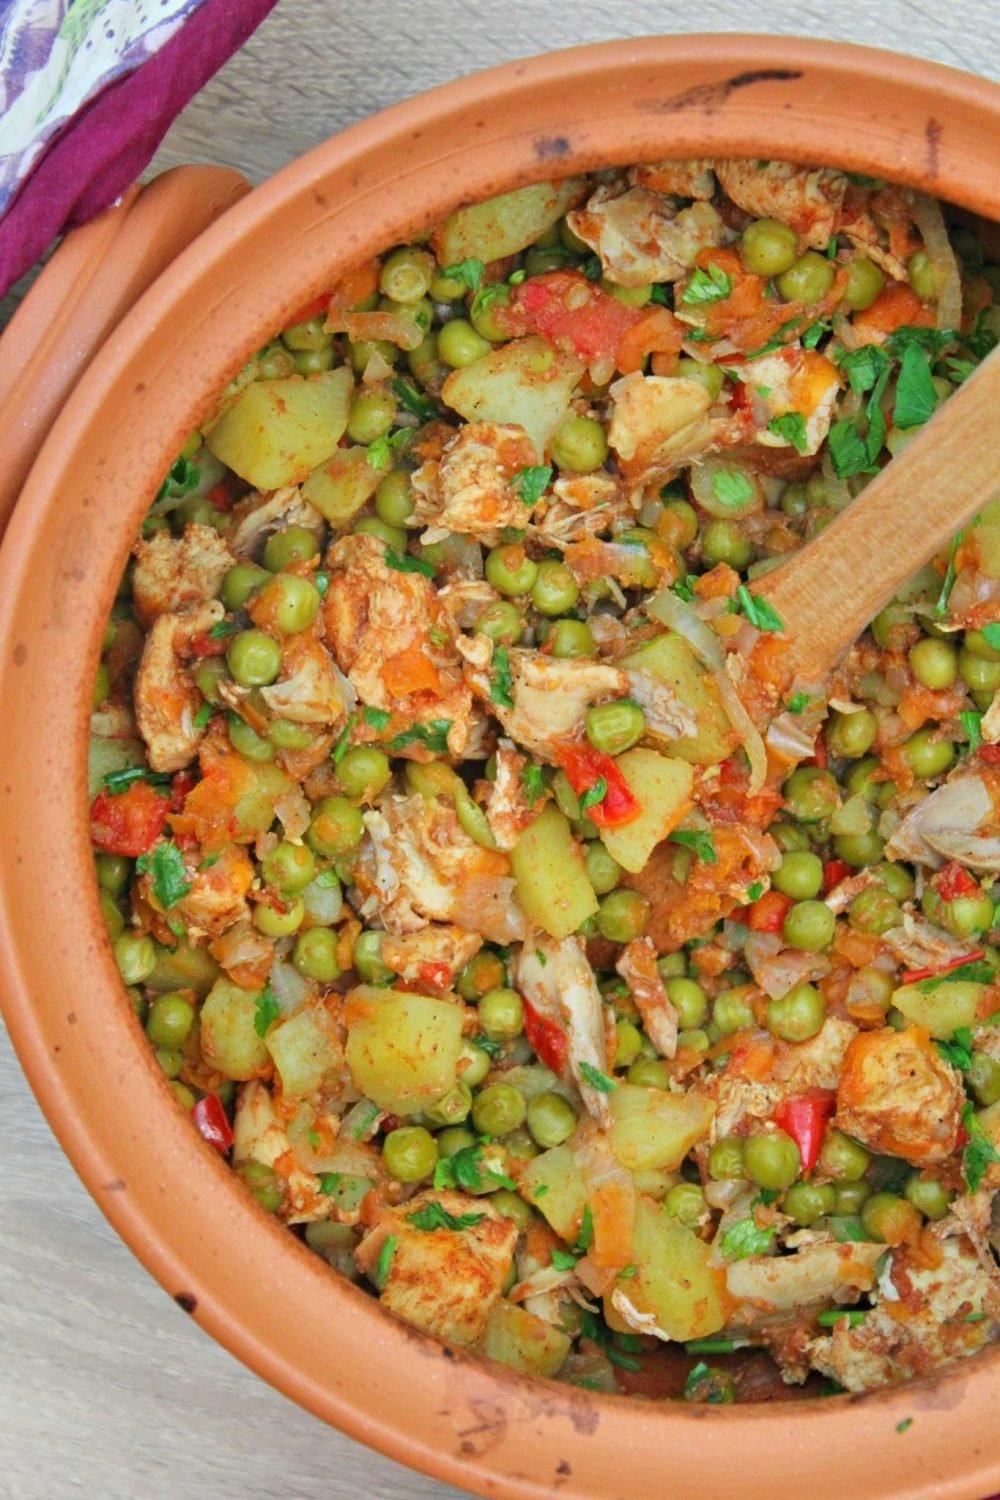 healthy and delicious, this oven chicken stew is the perfect comfort food!